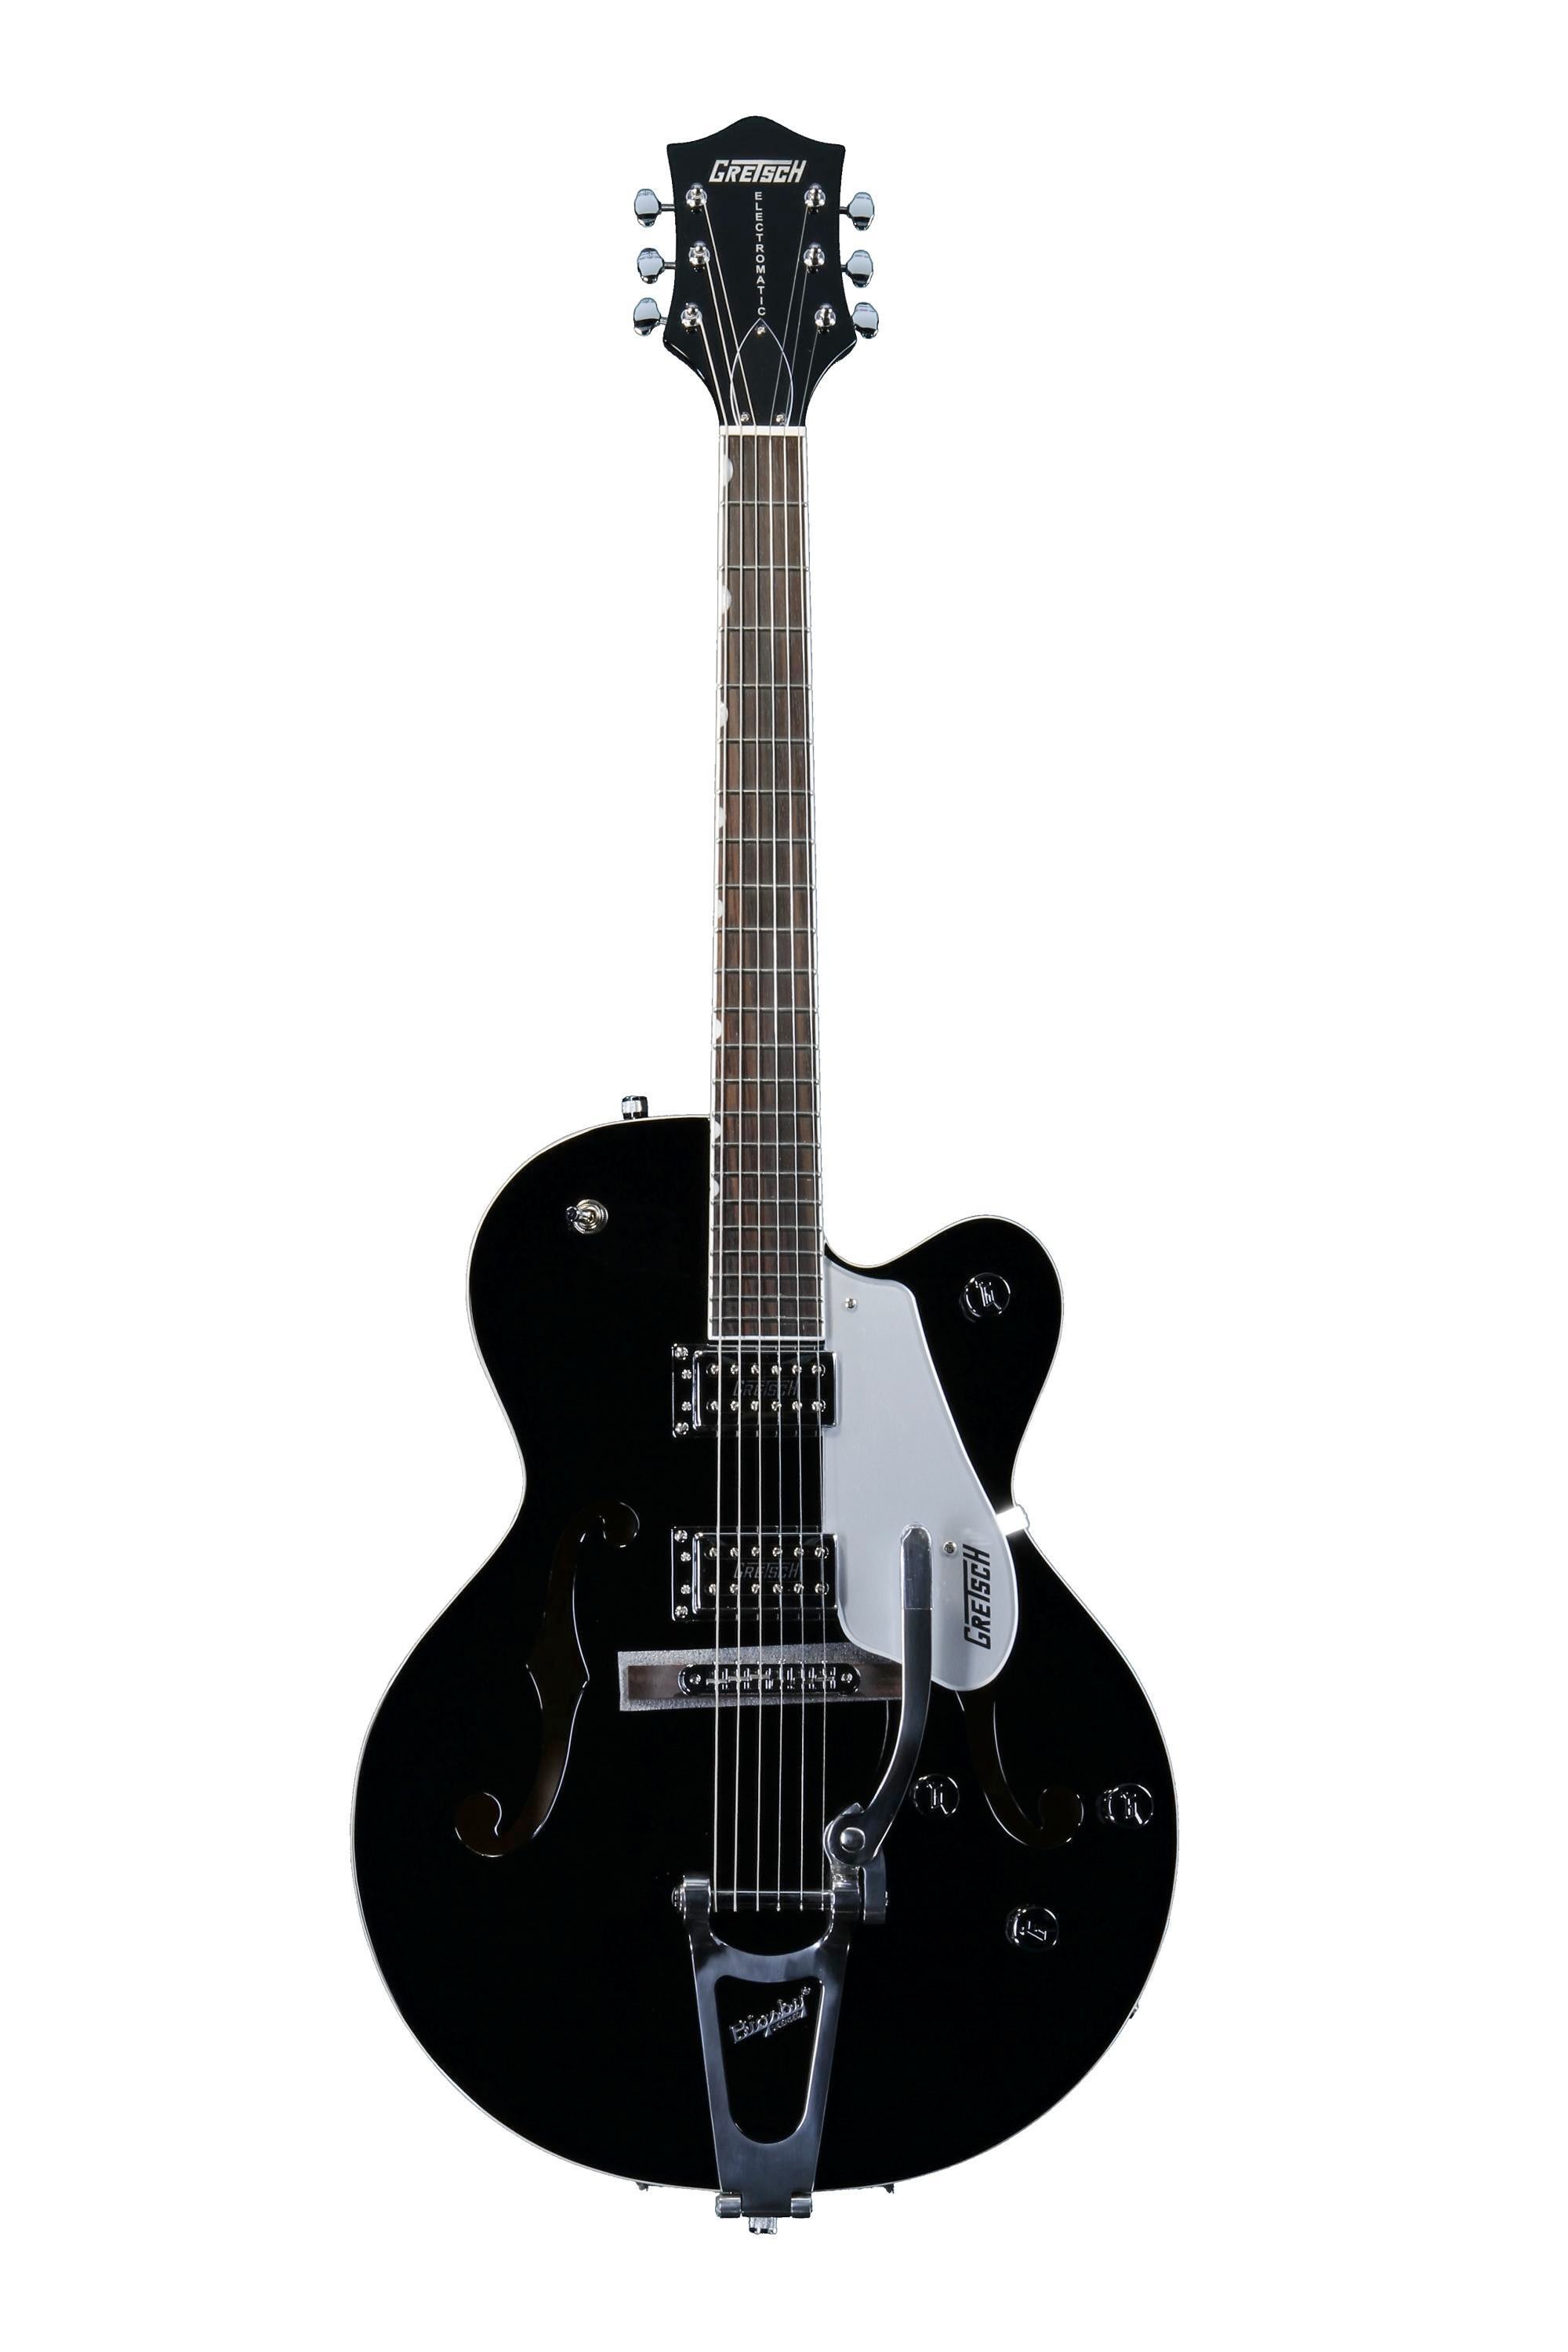 Gretsch G5120 Electromatic Hollow Body - Black | Sweetwater